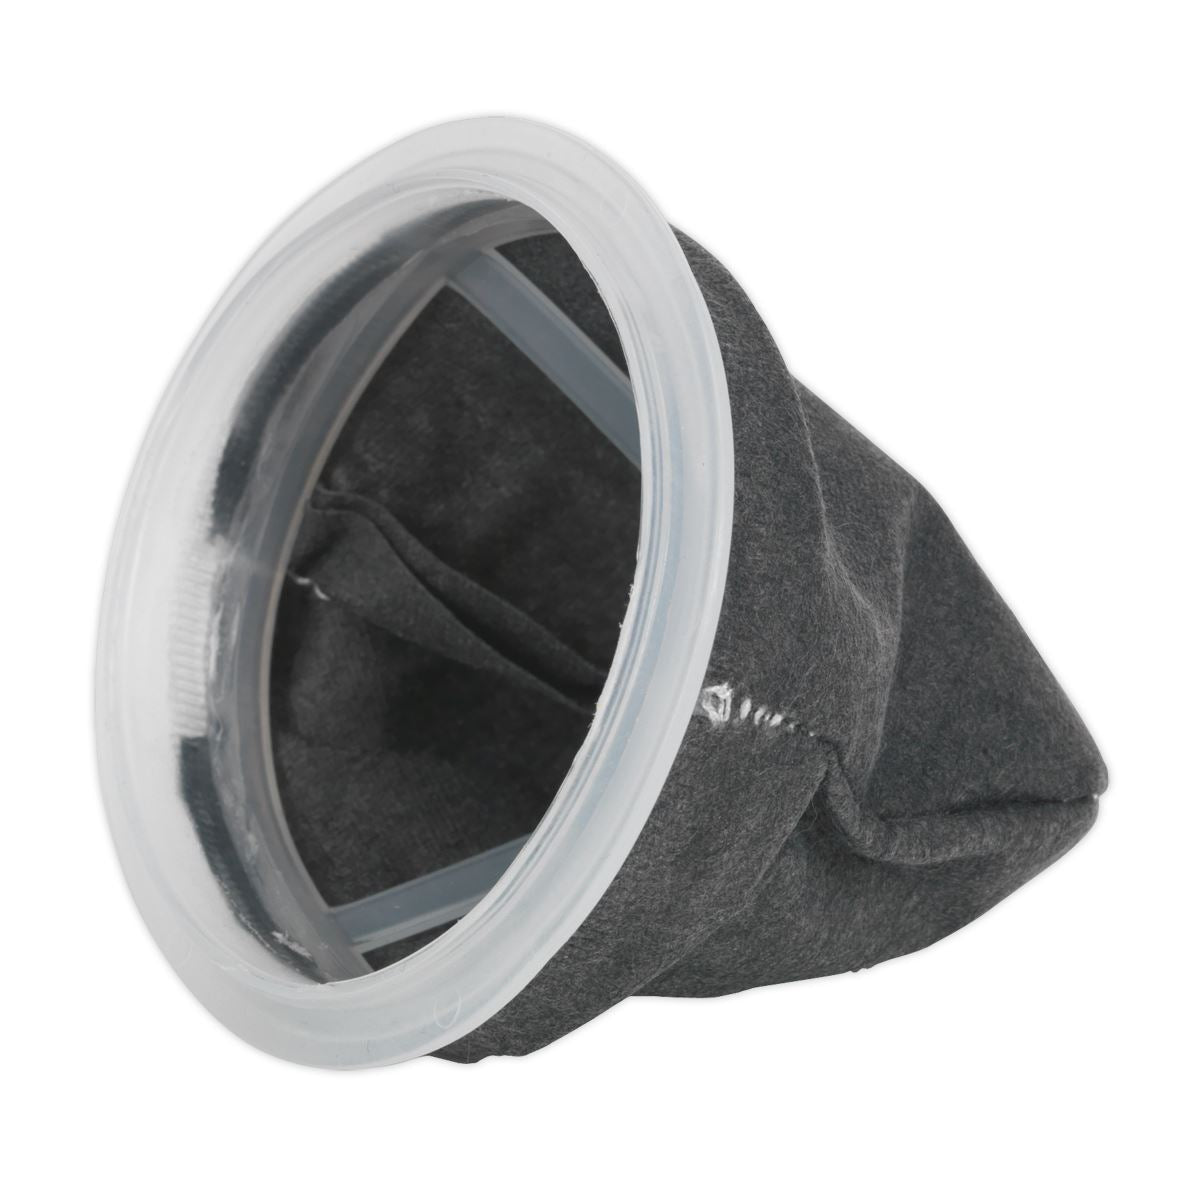 Sealey Foam Filter for CPV72